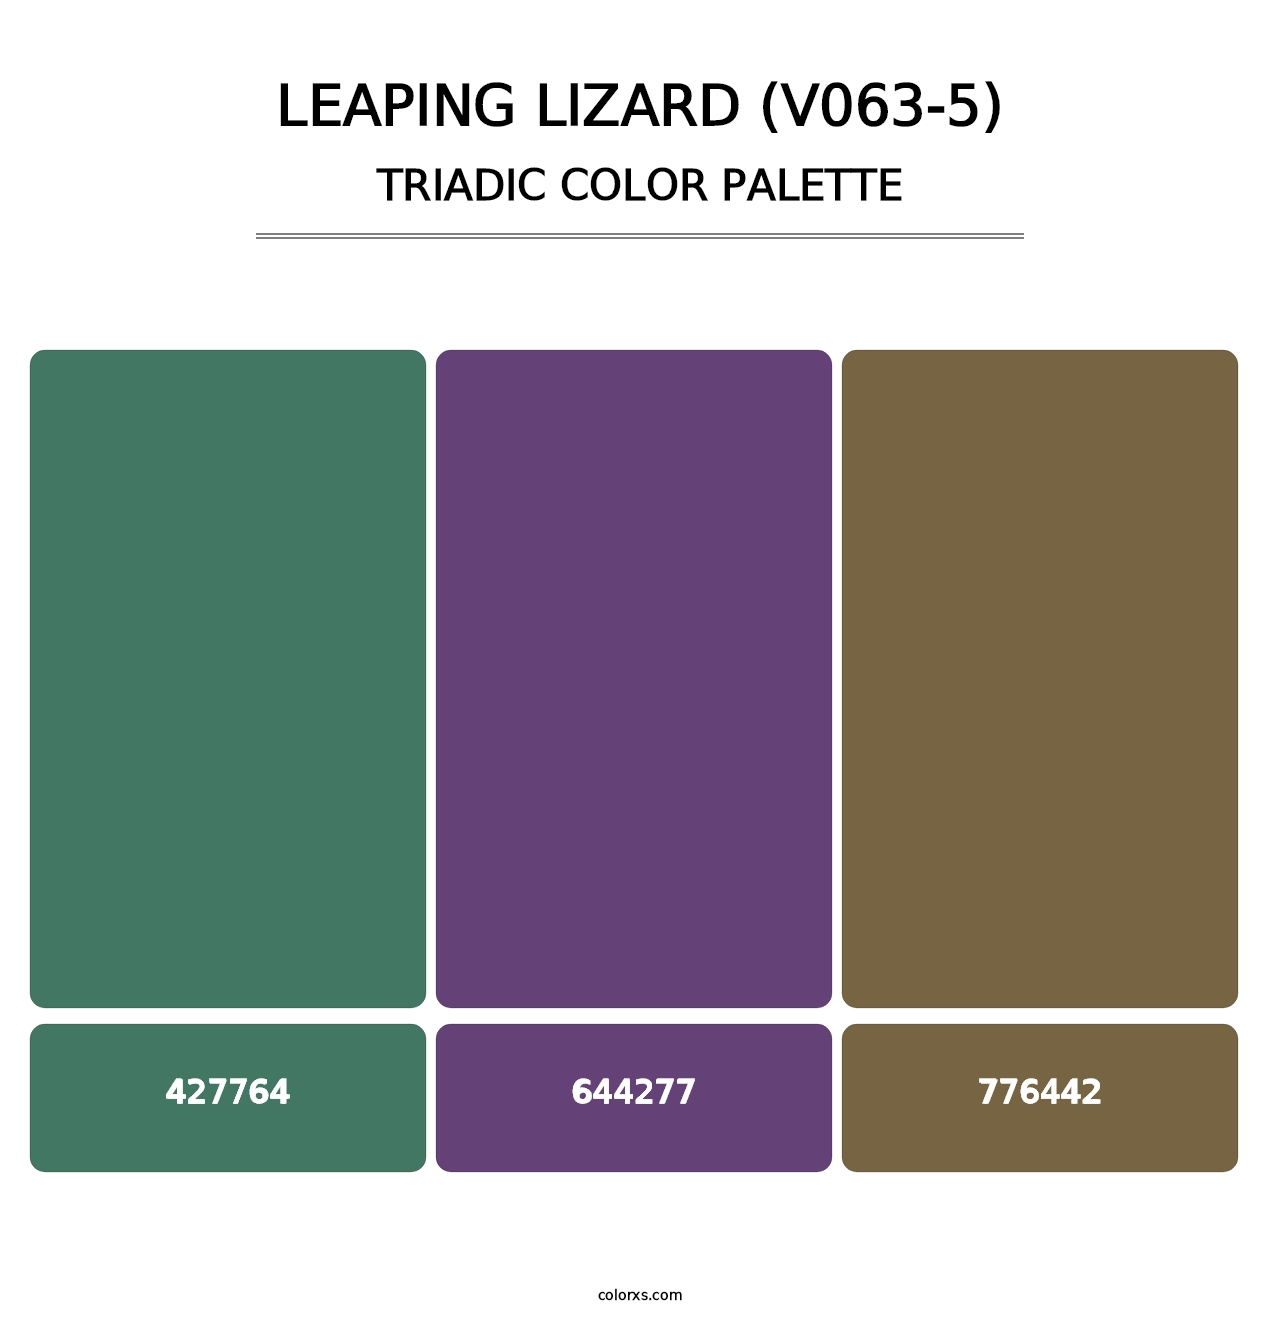 Leaping Lizard (V063-5) - Triadic Color Palette